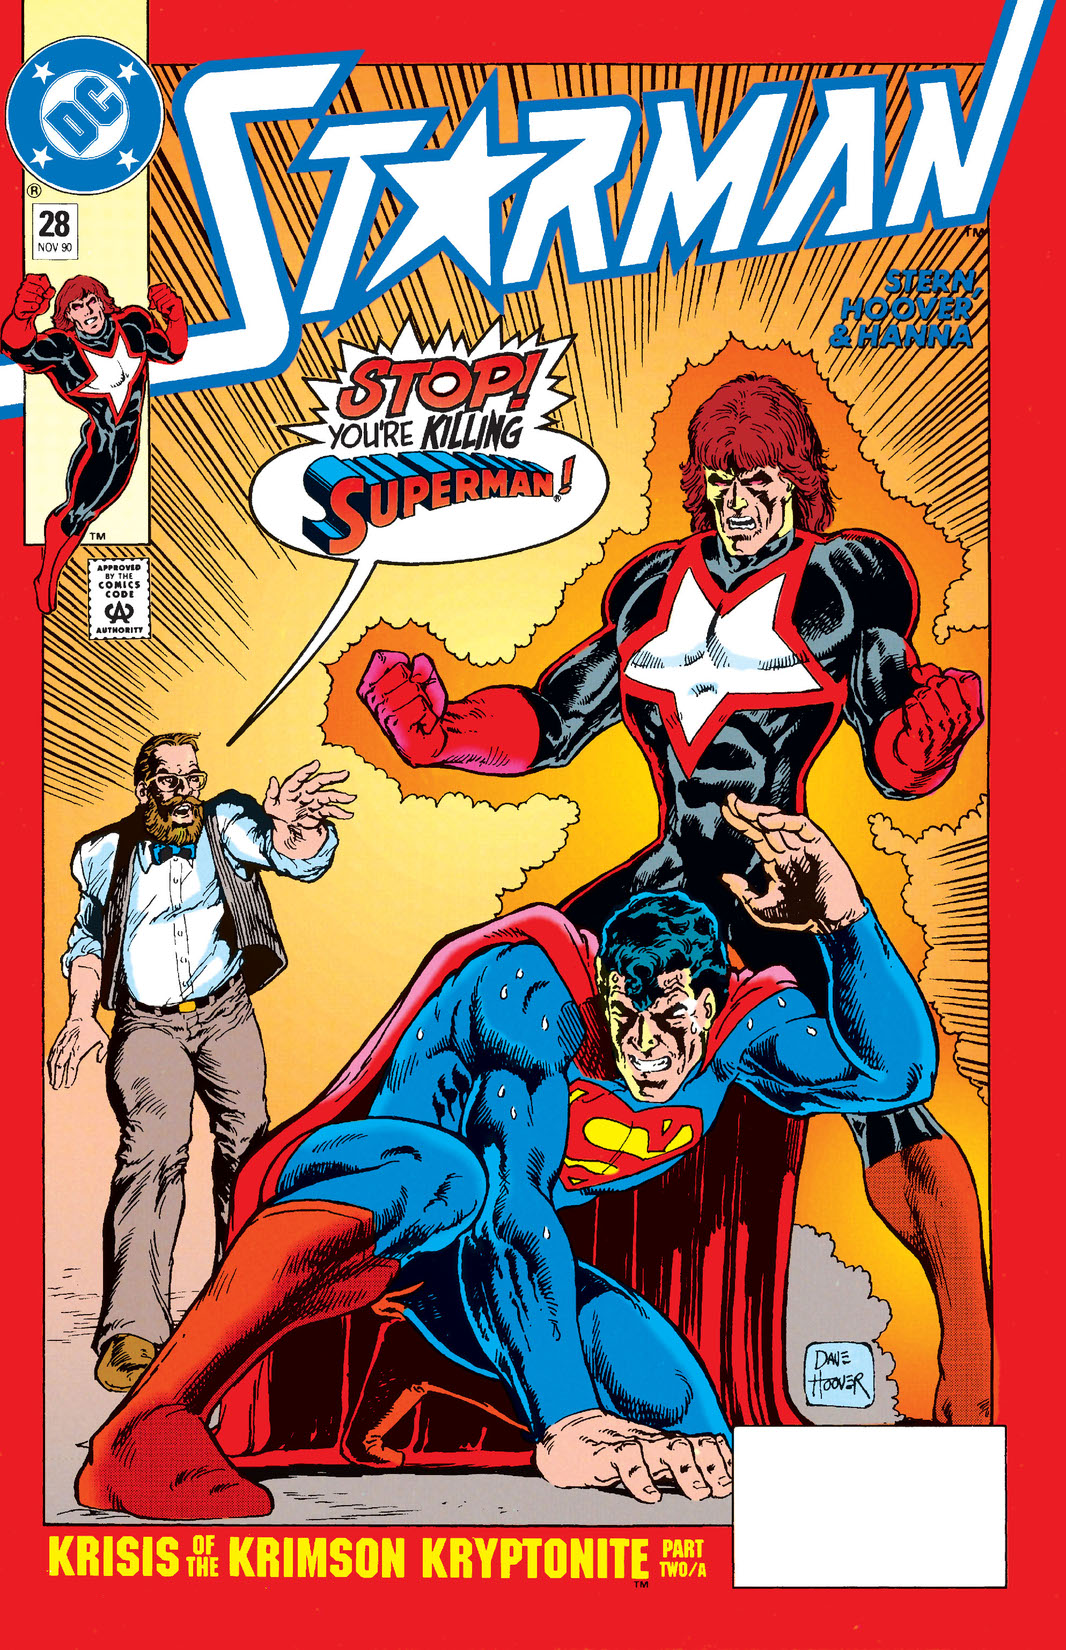 Starman (1988-) #28 preview images